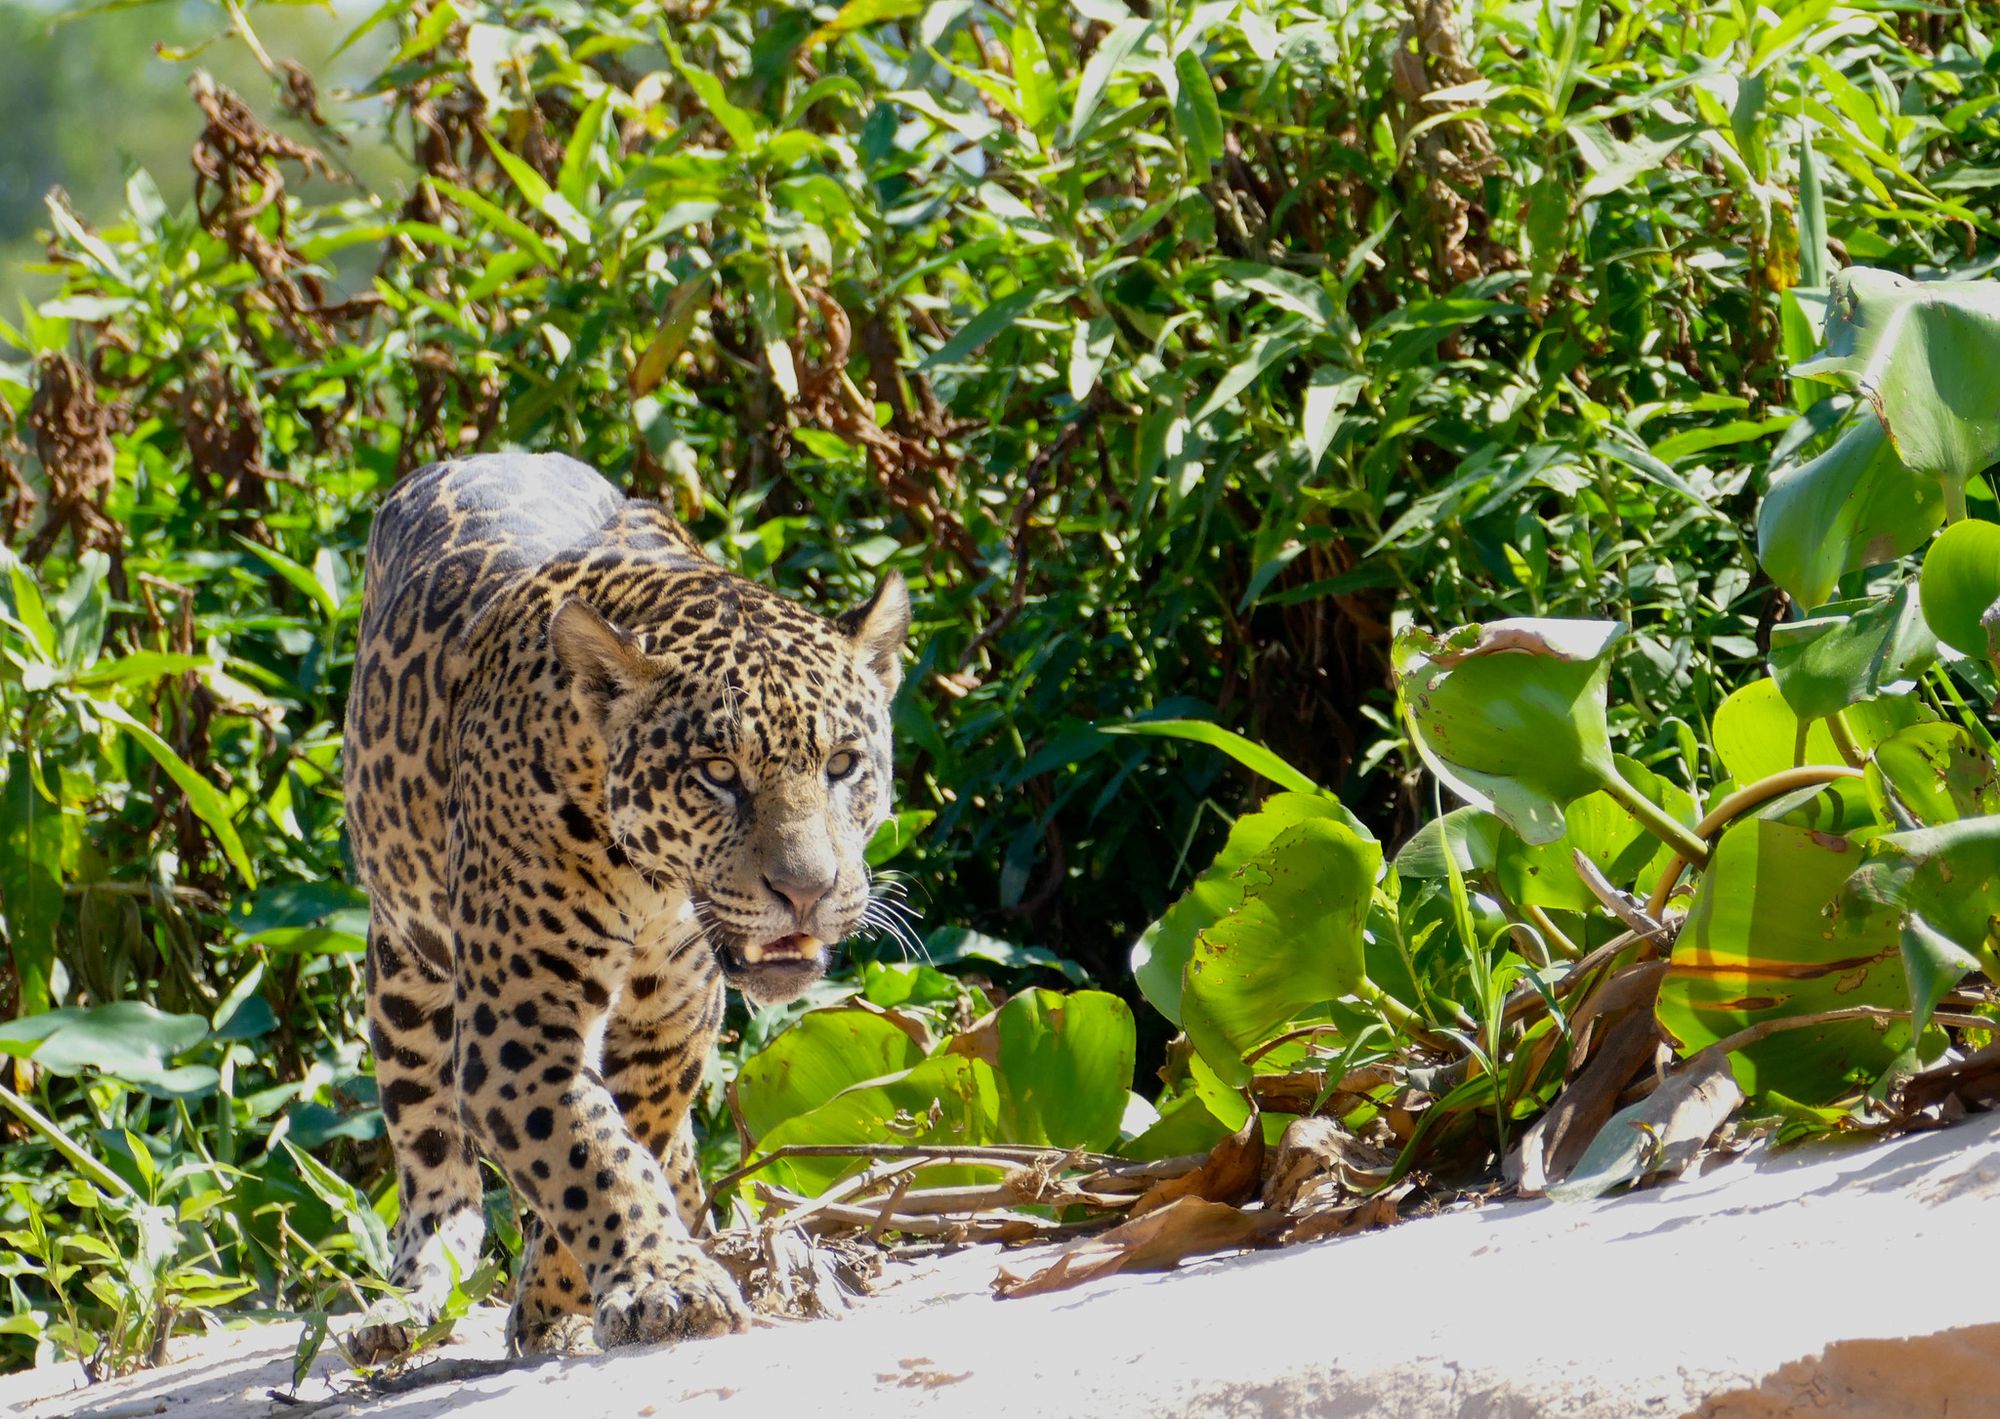 A jaguar walking along a sandbank with green plants and shrubs in the background